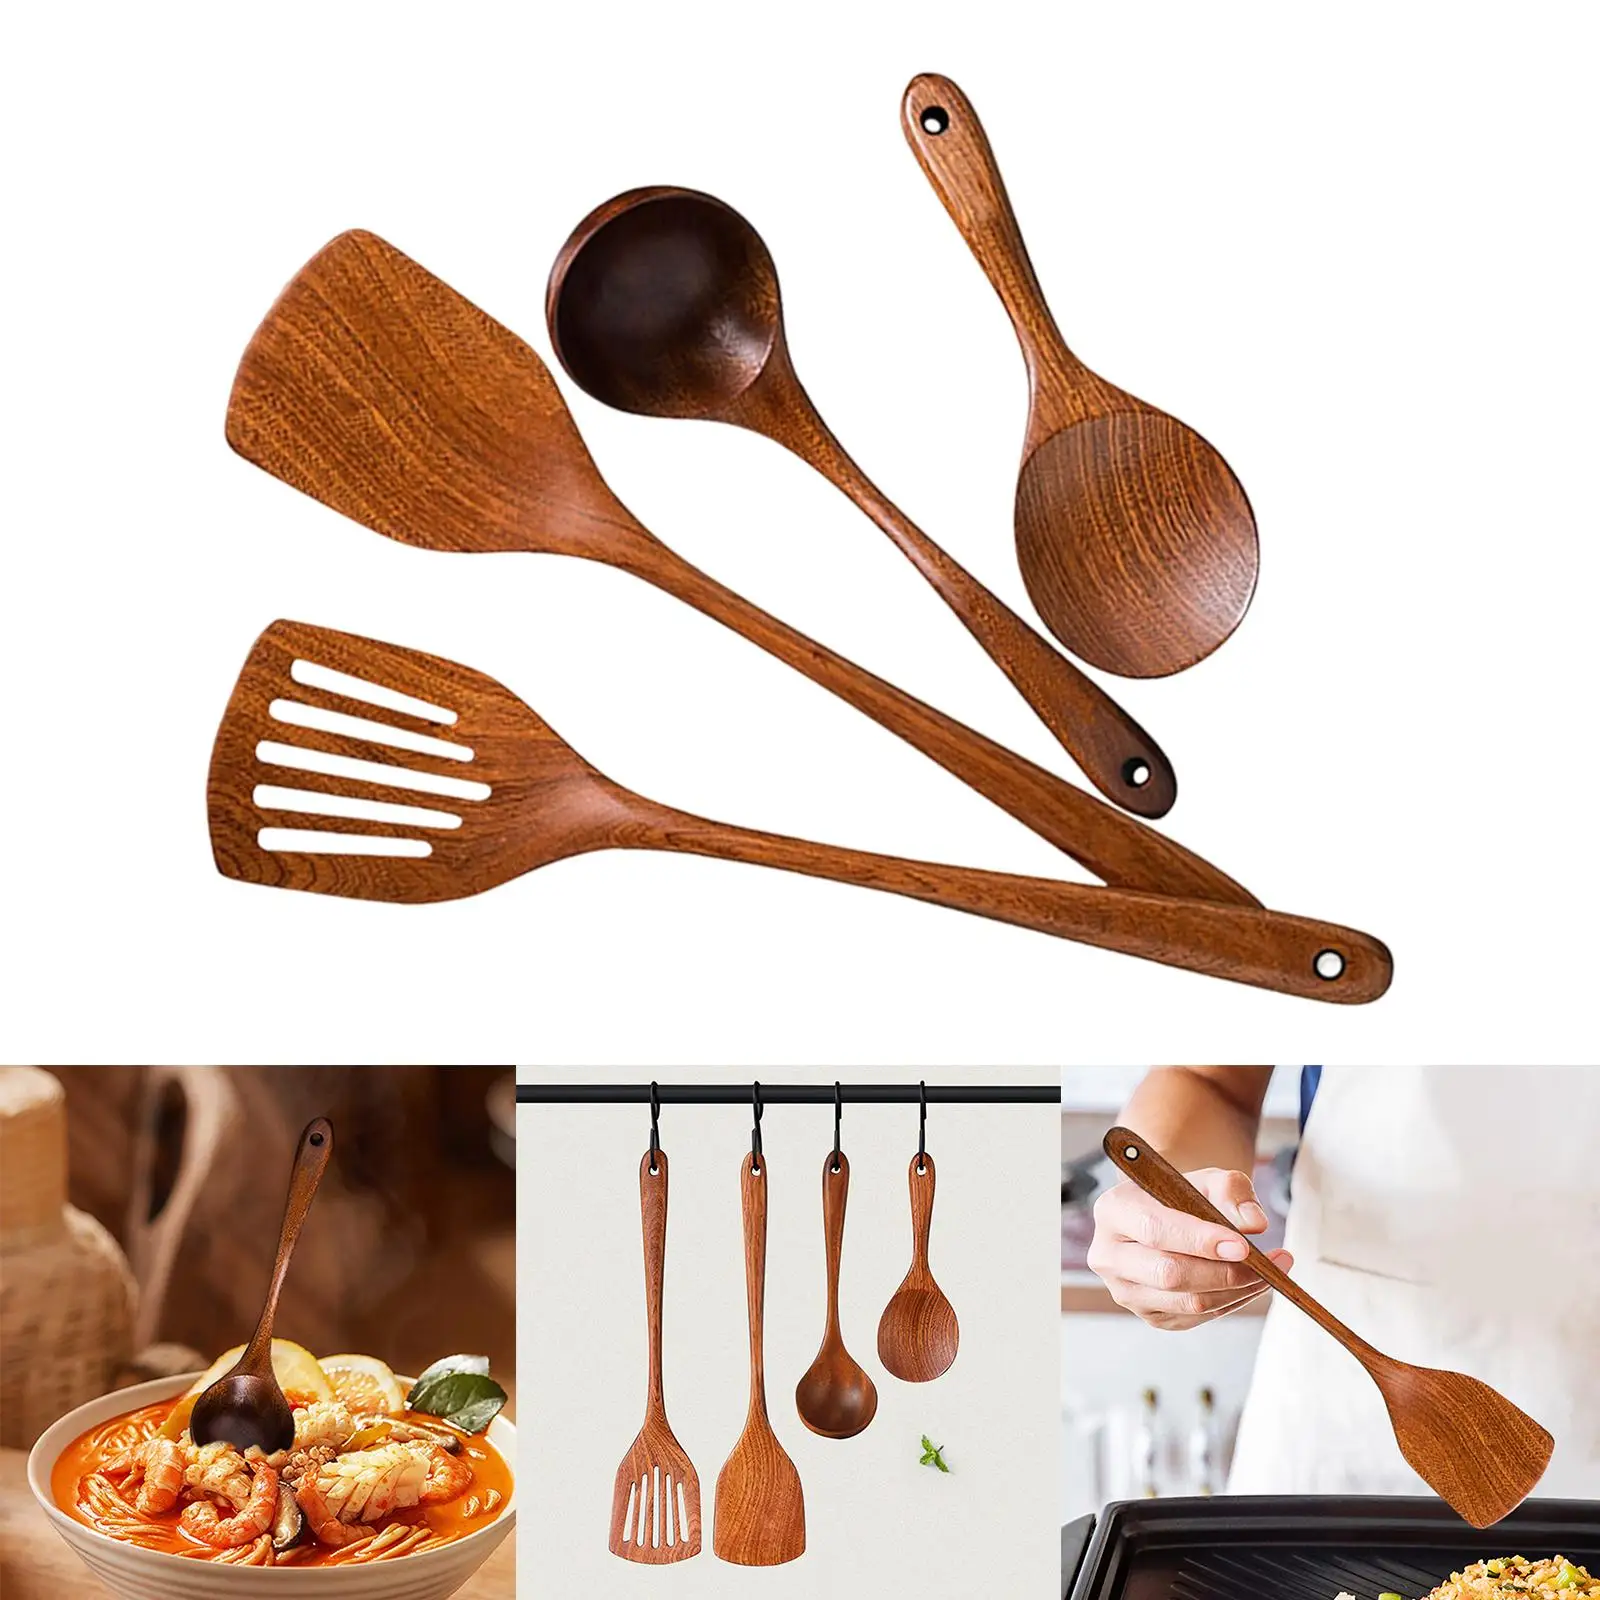 4x Japanese Style Wooden Kitchen Cooking Spoon Utensils Set Long Handle Ladles and Spoons Kitchen Gadgets